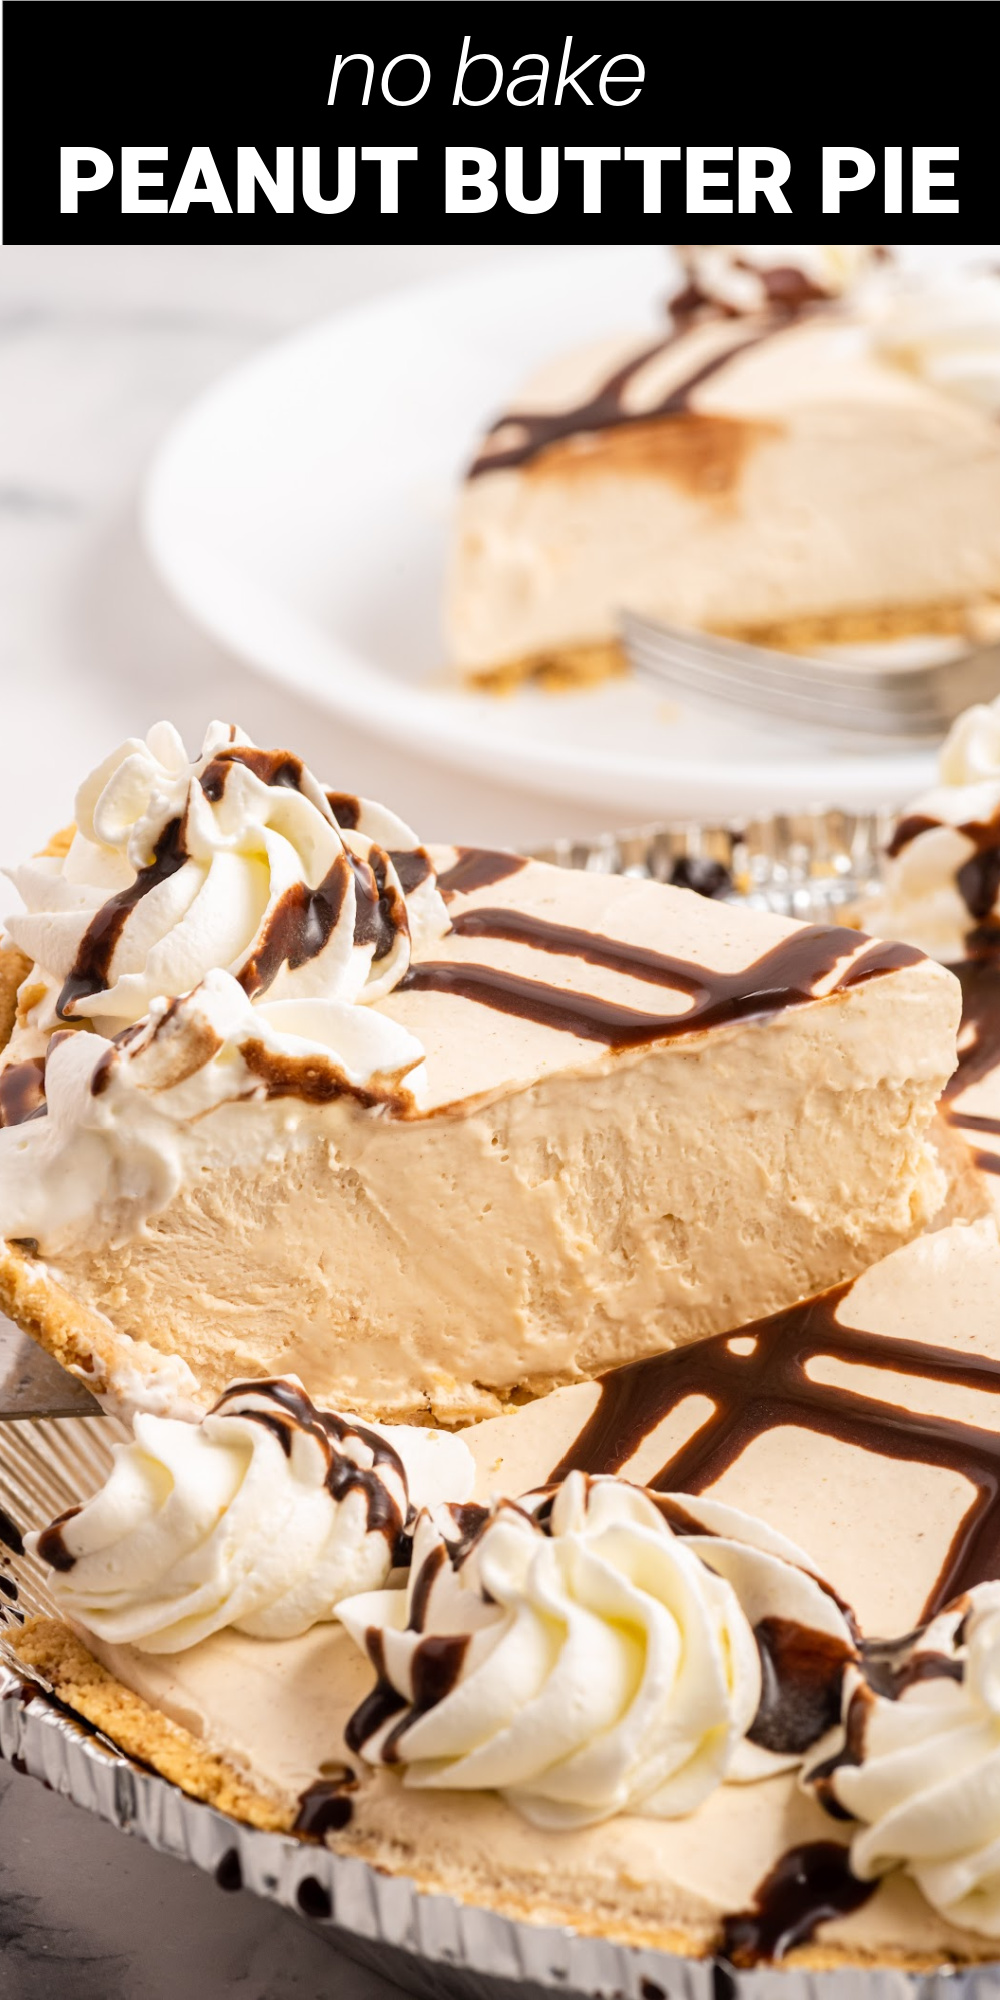 This easy No Bake Peanut Butter Pie is a silky smooth, rich and decadent dessert sure to please all the peanut butter fans in your life!